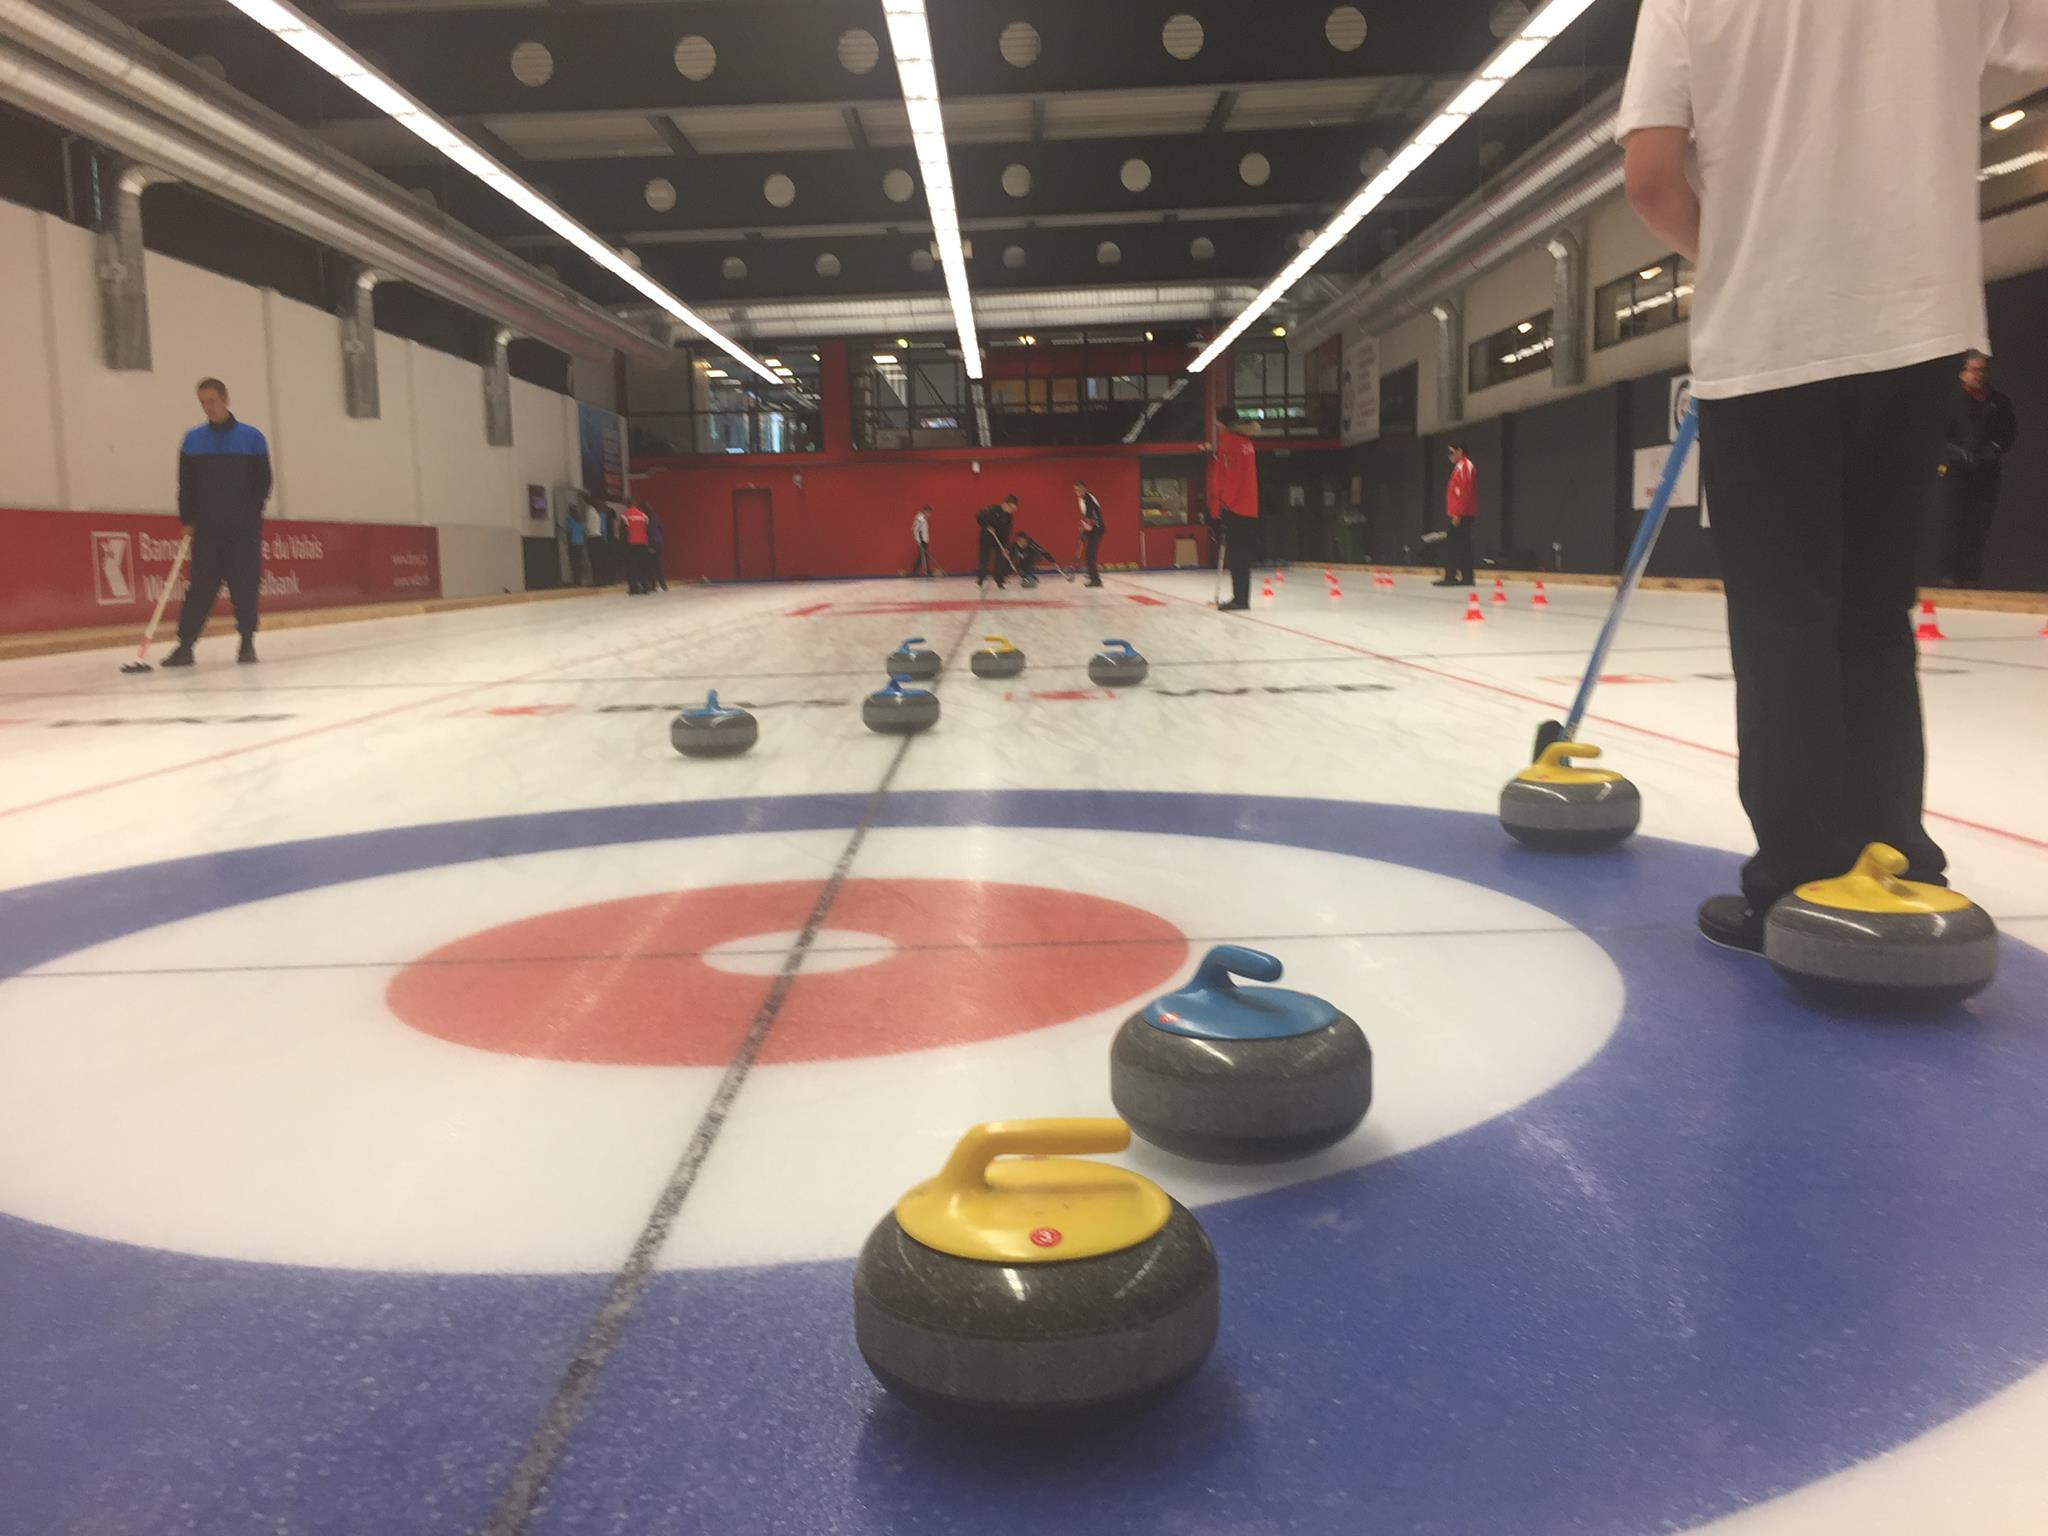 The Champery Curling Arena is the curling venue at Lausanne 2020 ©Facebook